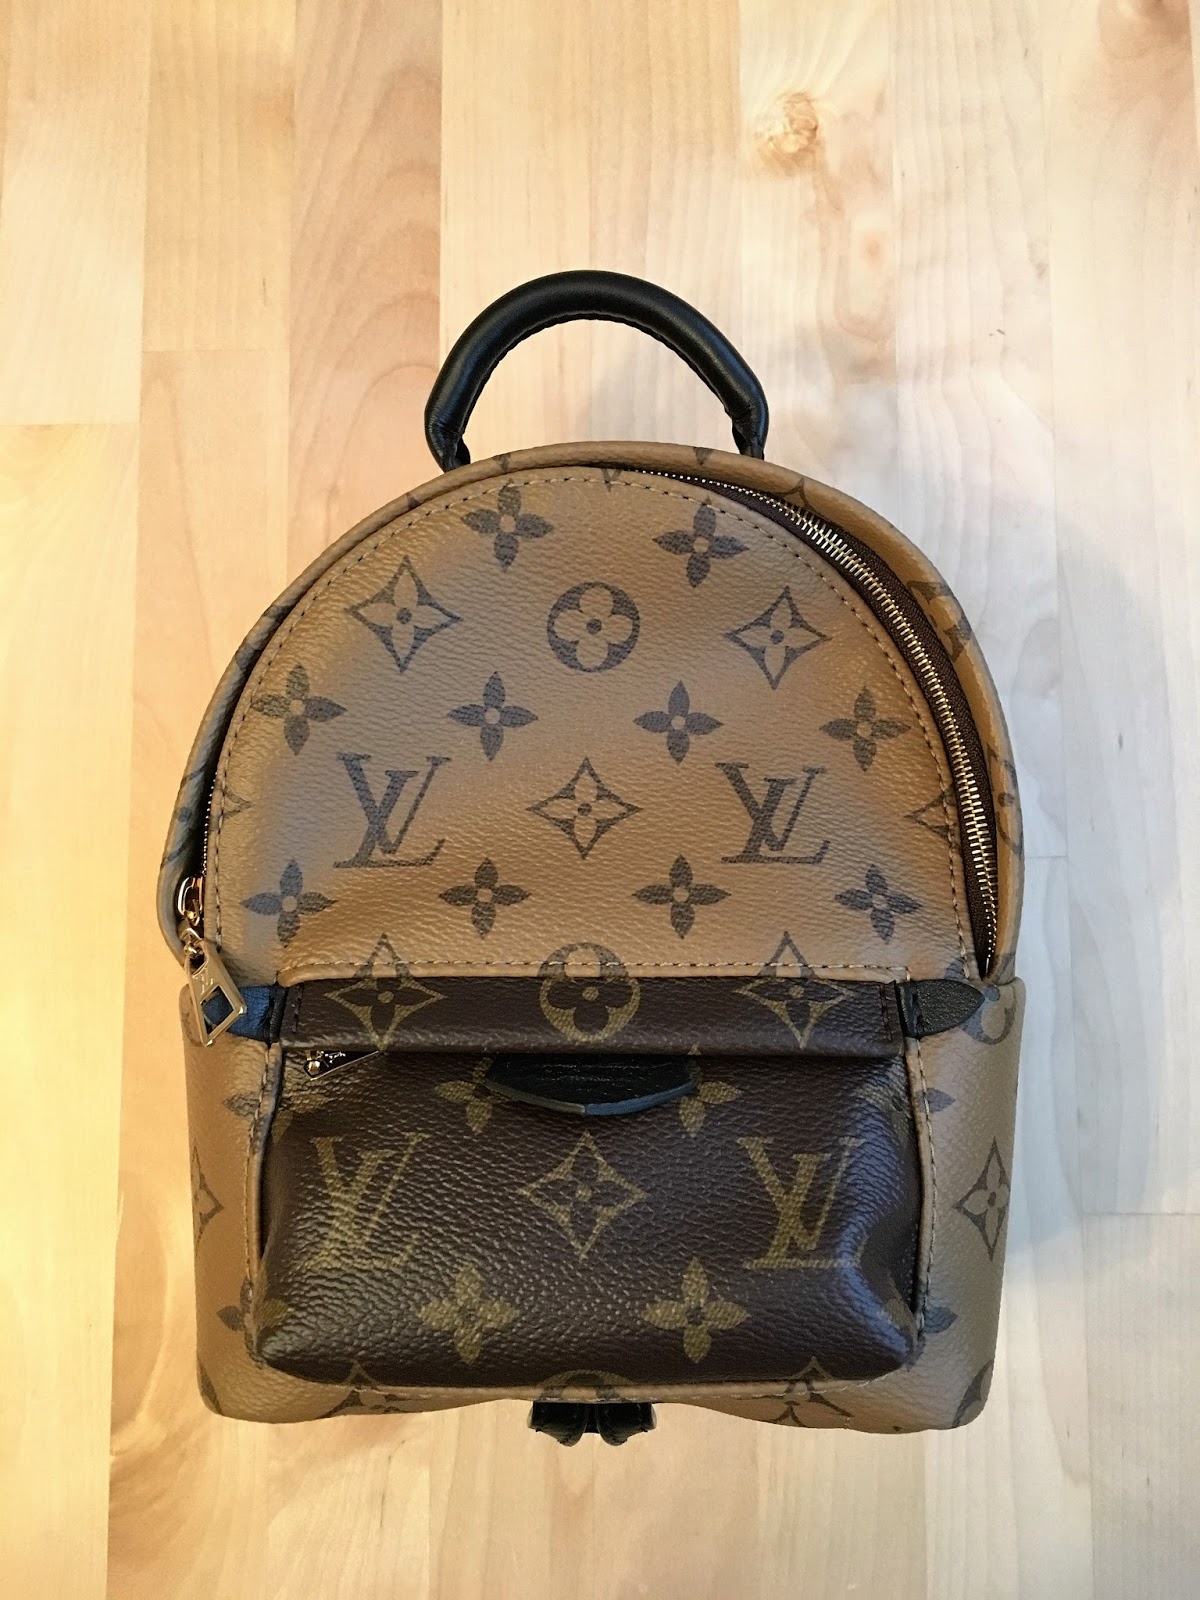 A Mascara Moment: Louis Vuitton Mini Palm Springs Backpack - Reverse Monogram - Review and Photos